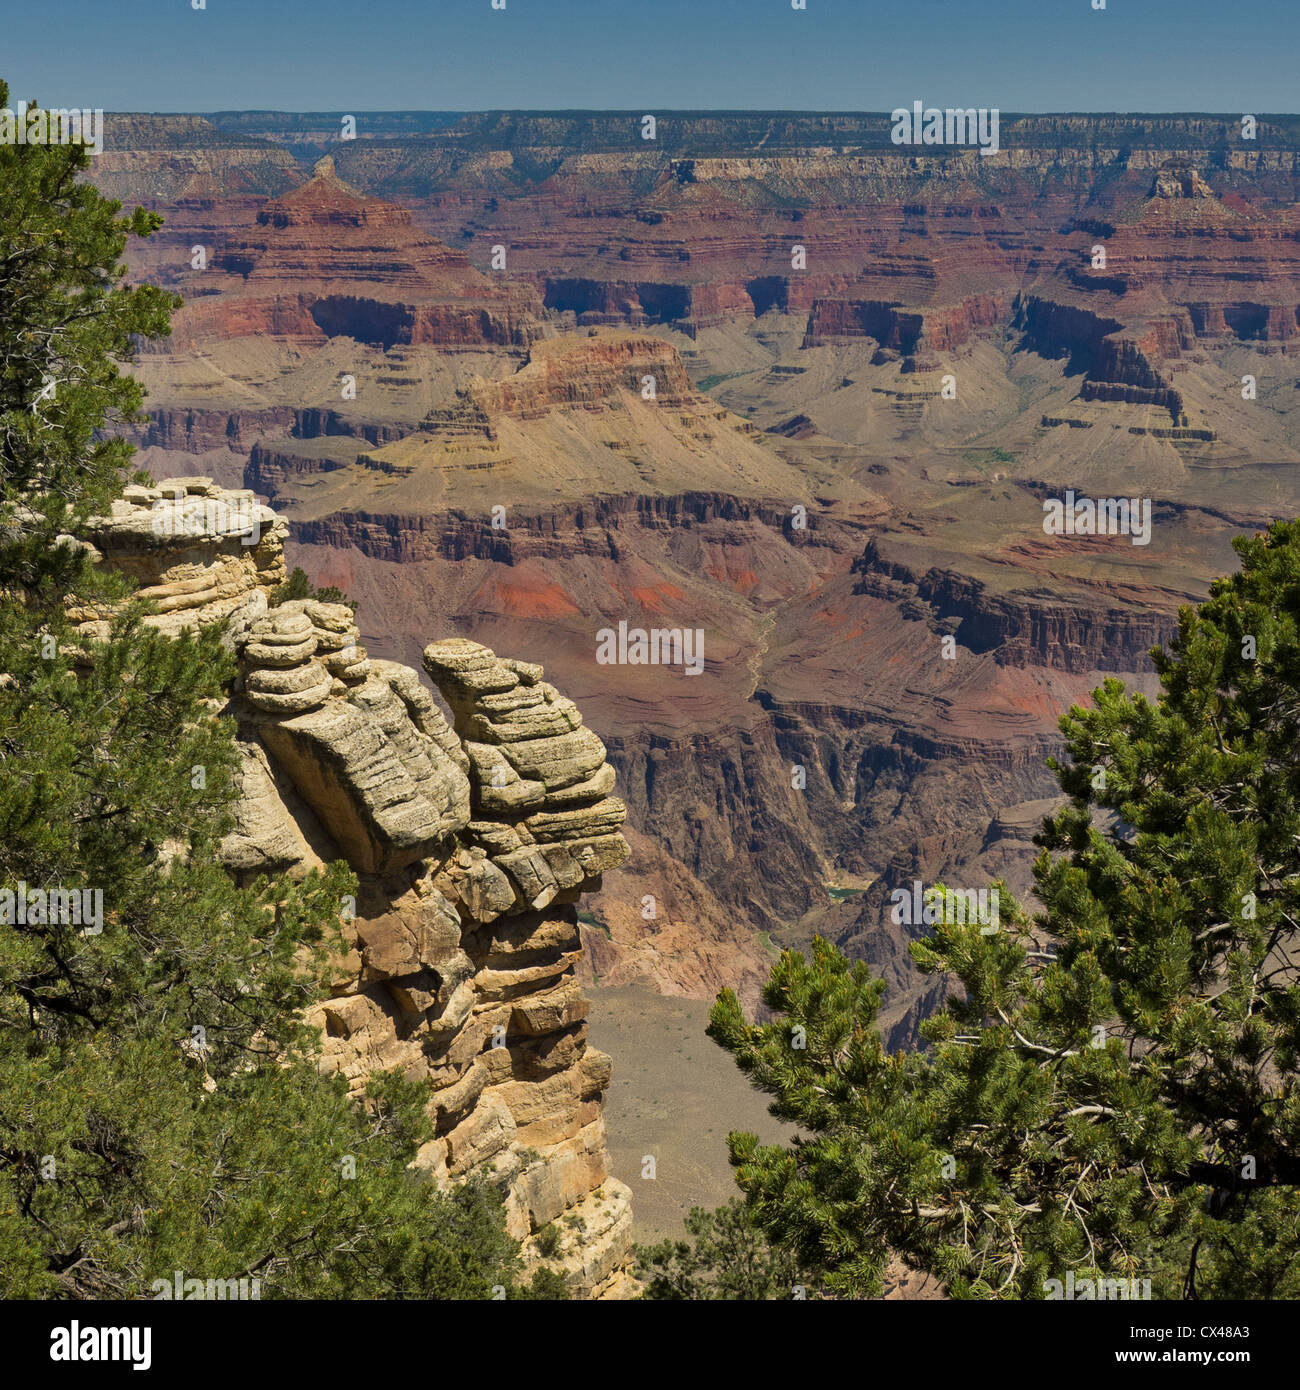 A view of the Grand Canyon from the South Rim in Arizona,USA Stock Photo